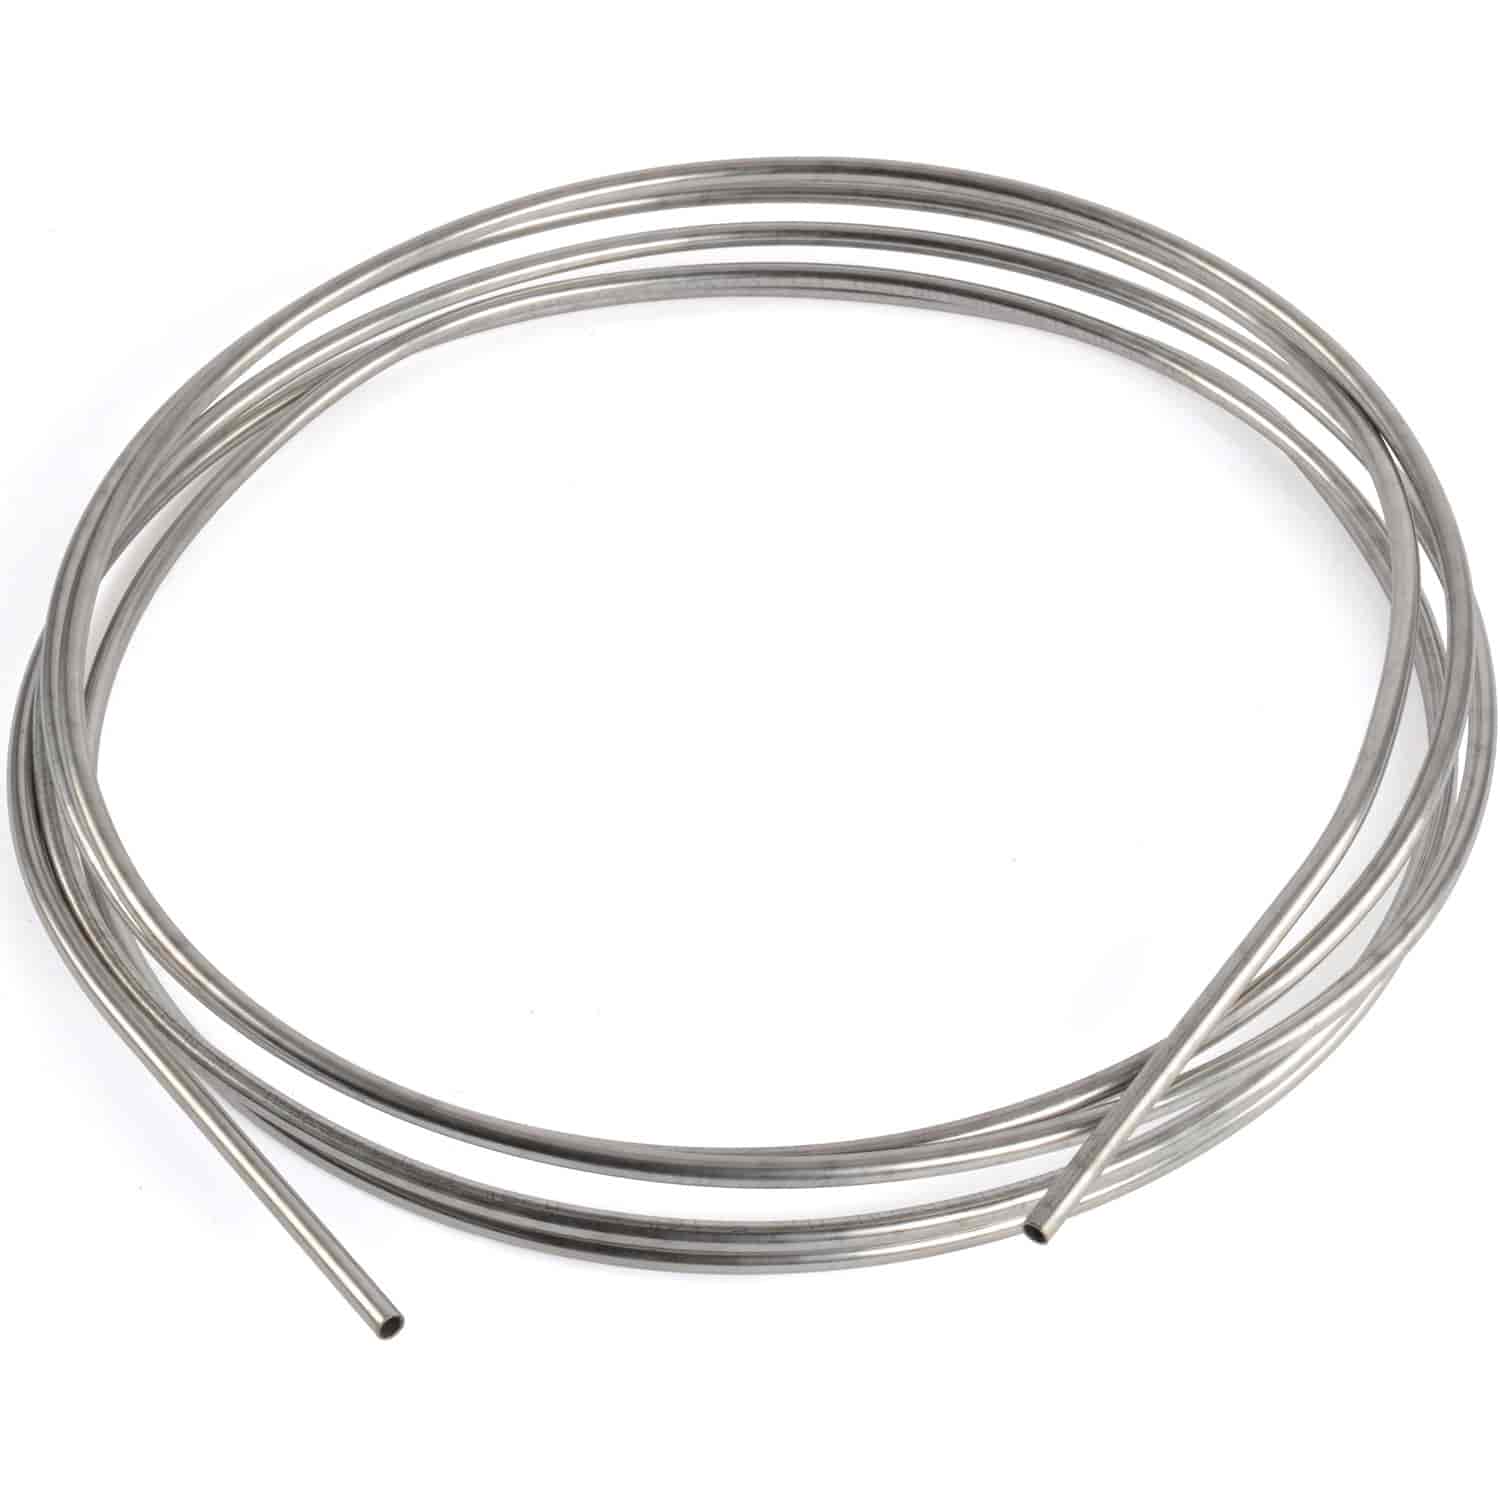 Stainless Steel Fuel Line Coil, 5/16 in. O.D. x .028 in. Wall Tubing [20 ft. Coil]